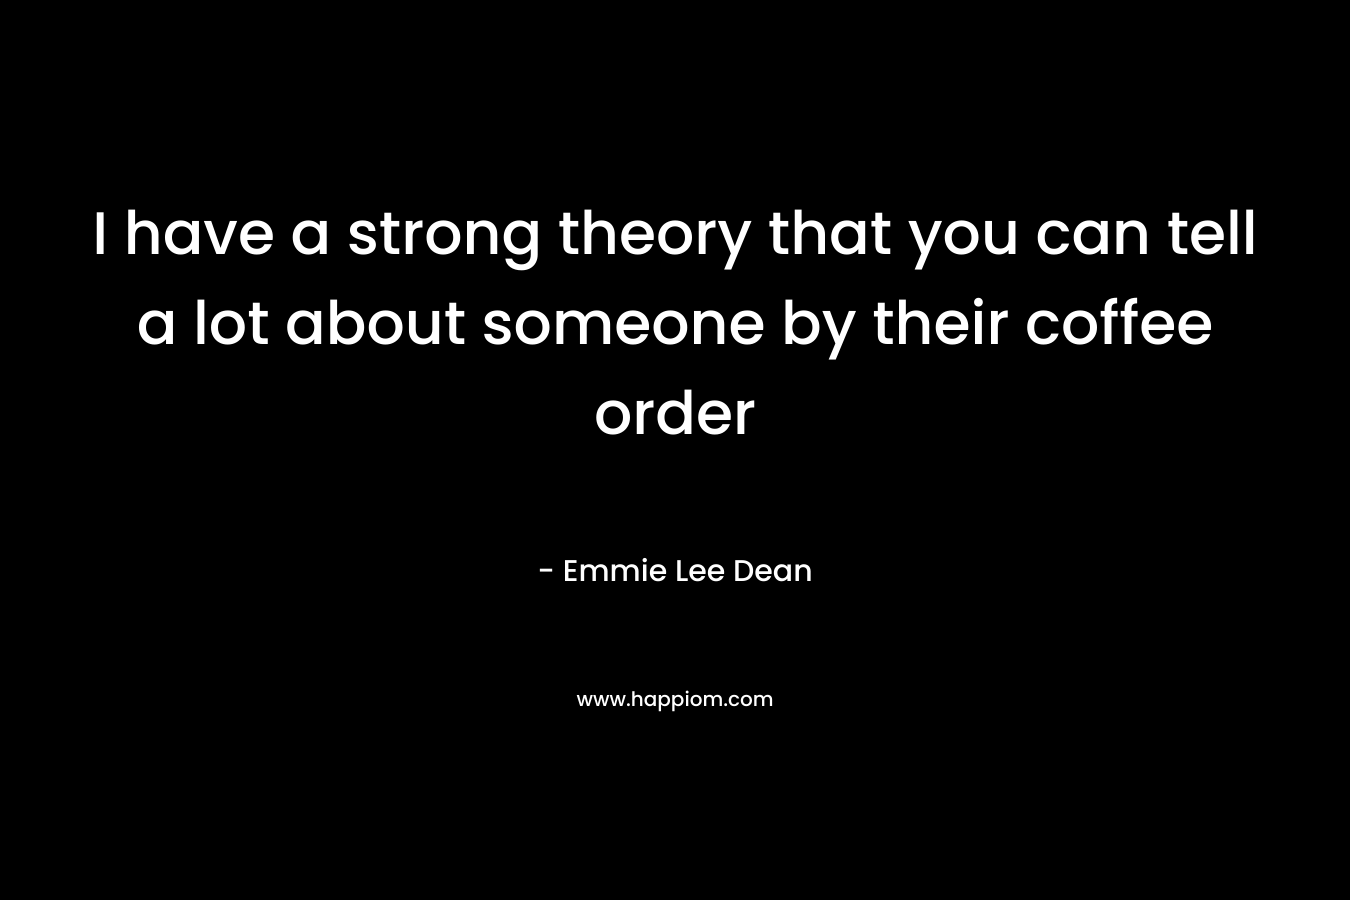 I have a strong theory that you can tell a lot about someone by their coffee order – Emmie Lee Dean